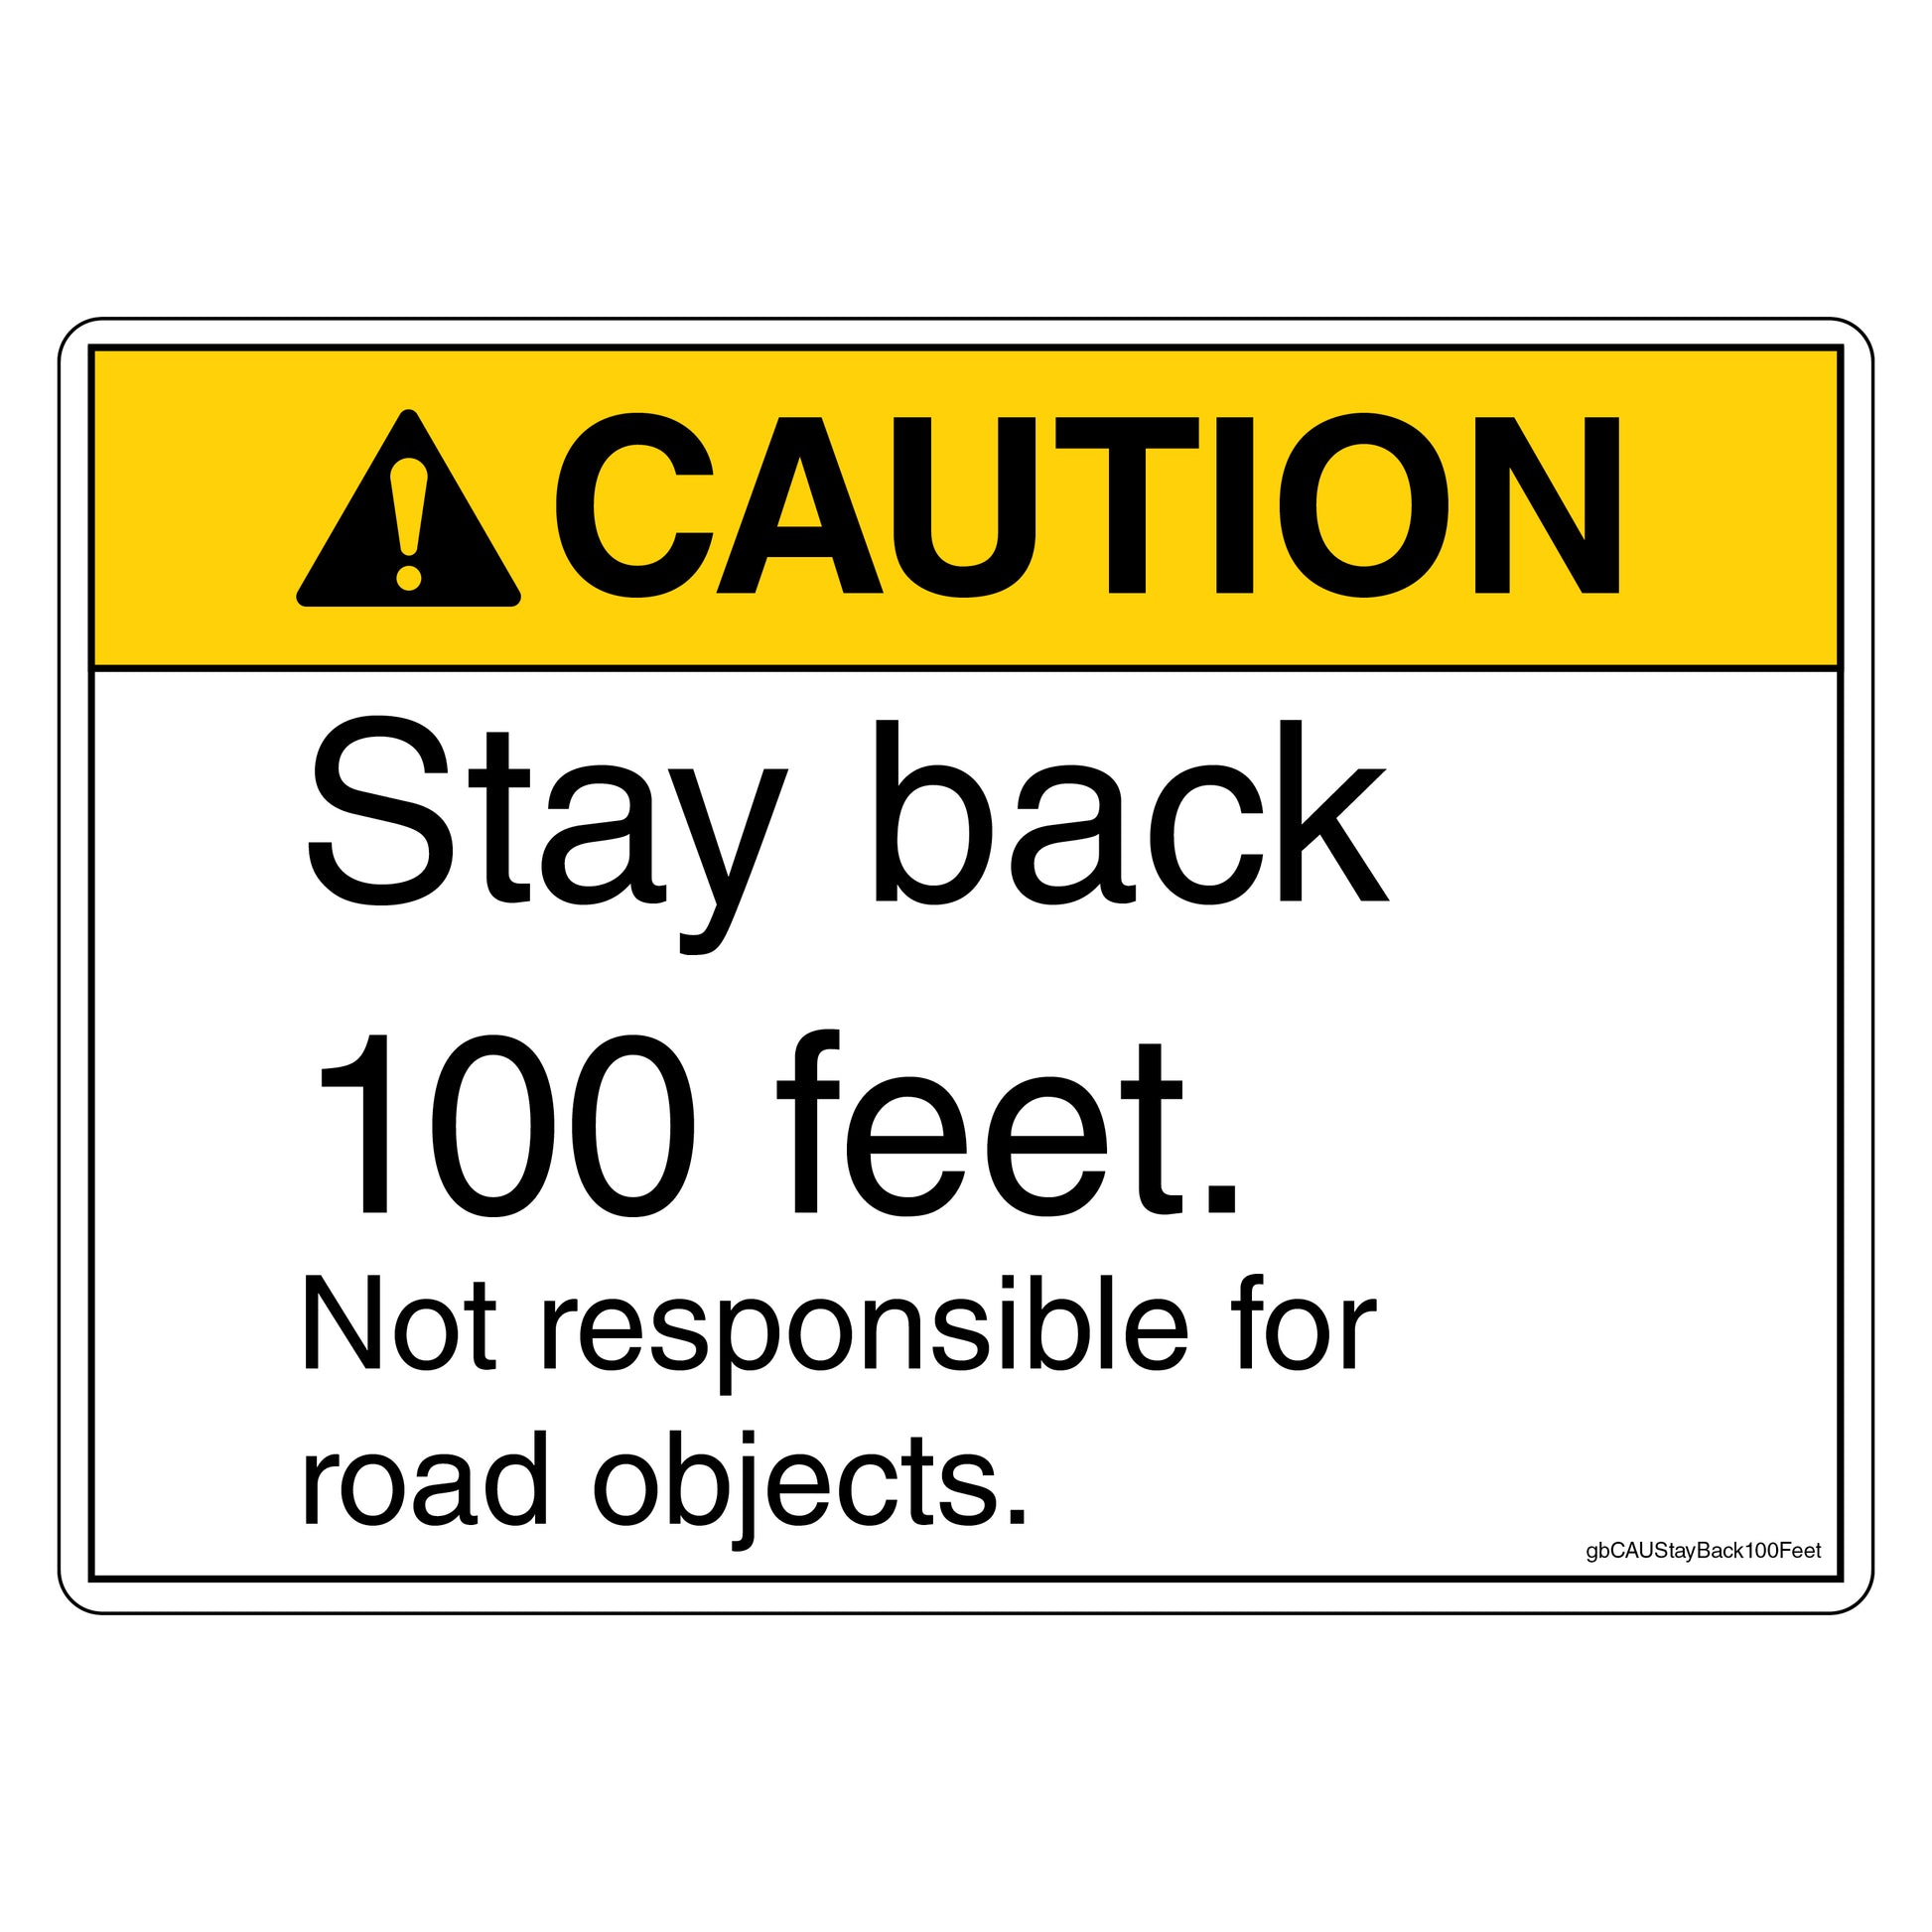 Caution Stay Back 100 Feet Not Responsible for Road Objects Decal.